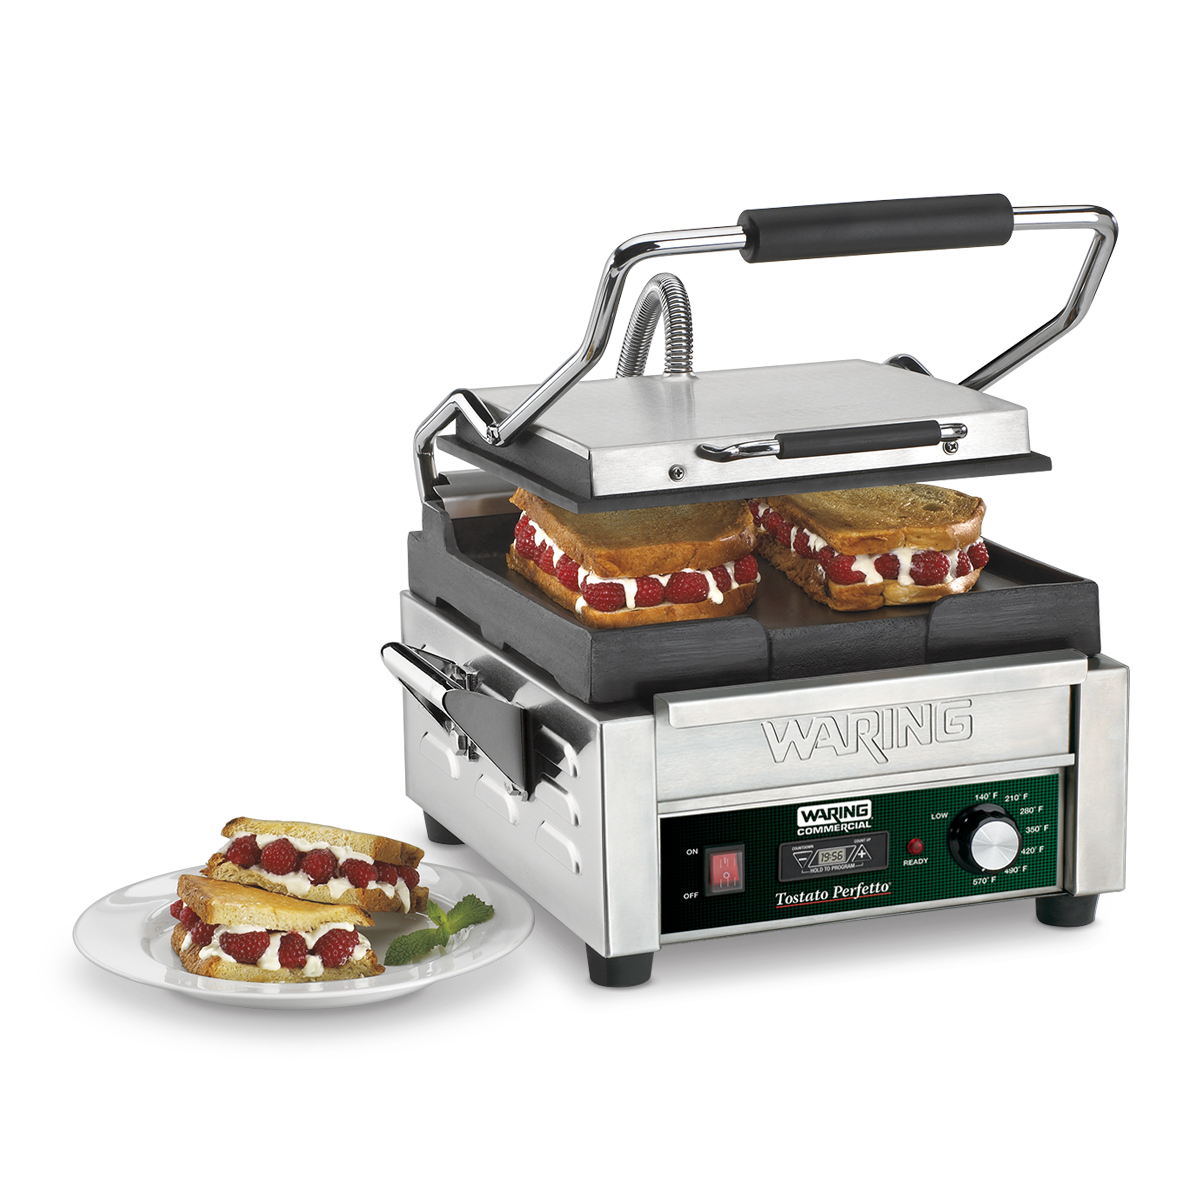 https://www.waringcommercialproducts.com/files/products/wfg150t-waring-compact-flat-grill-with-timer-inset1.jpg